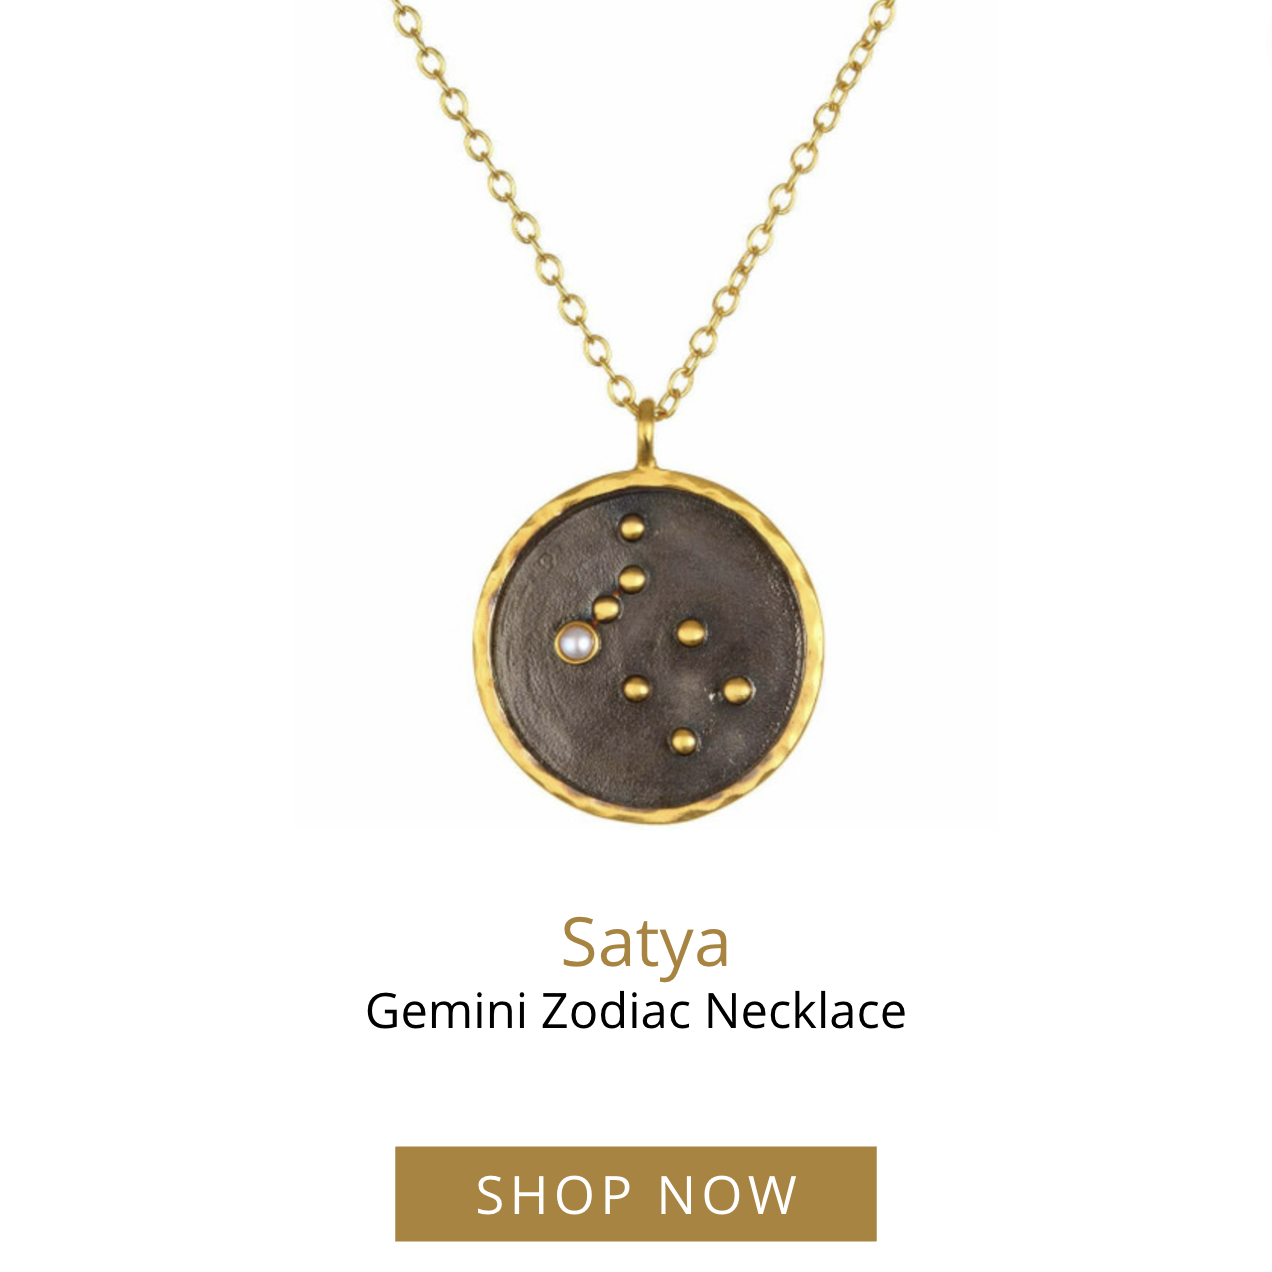 Zodiac Necklaces: What They Mean & Why You Should Wear Them